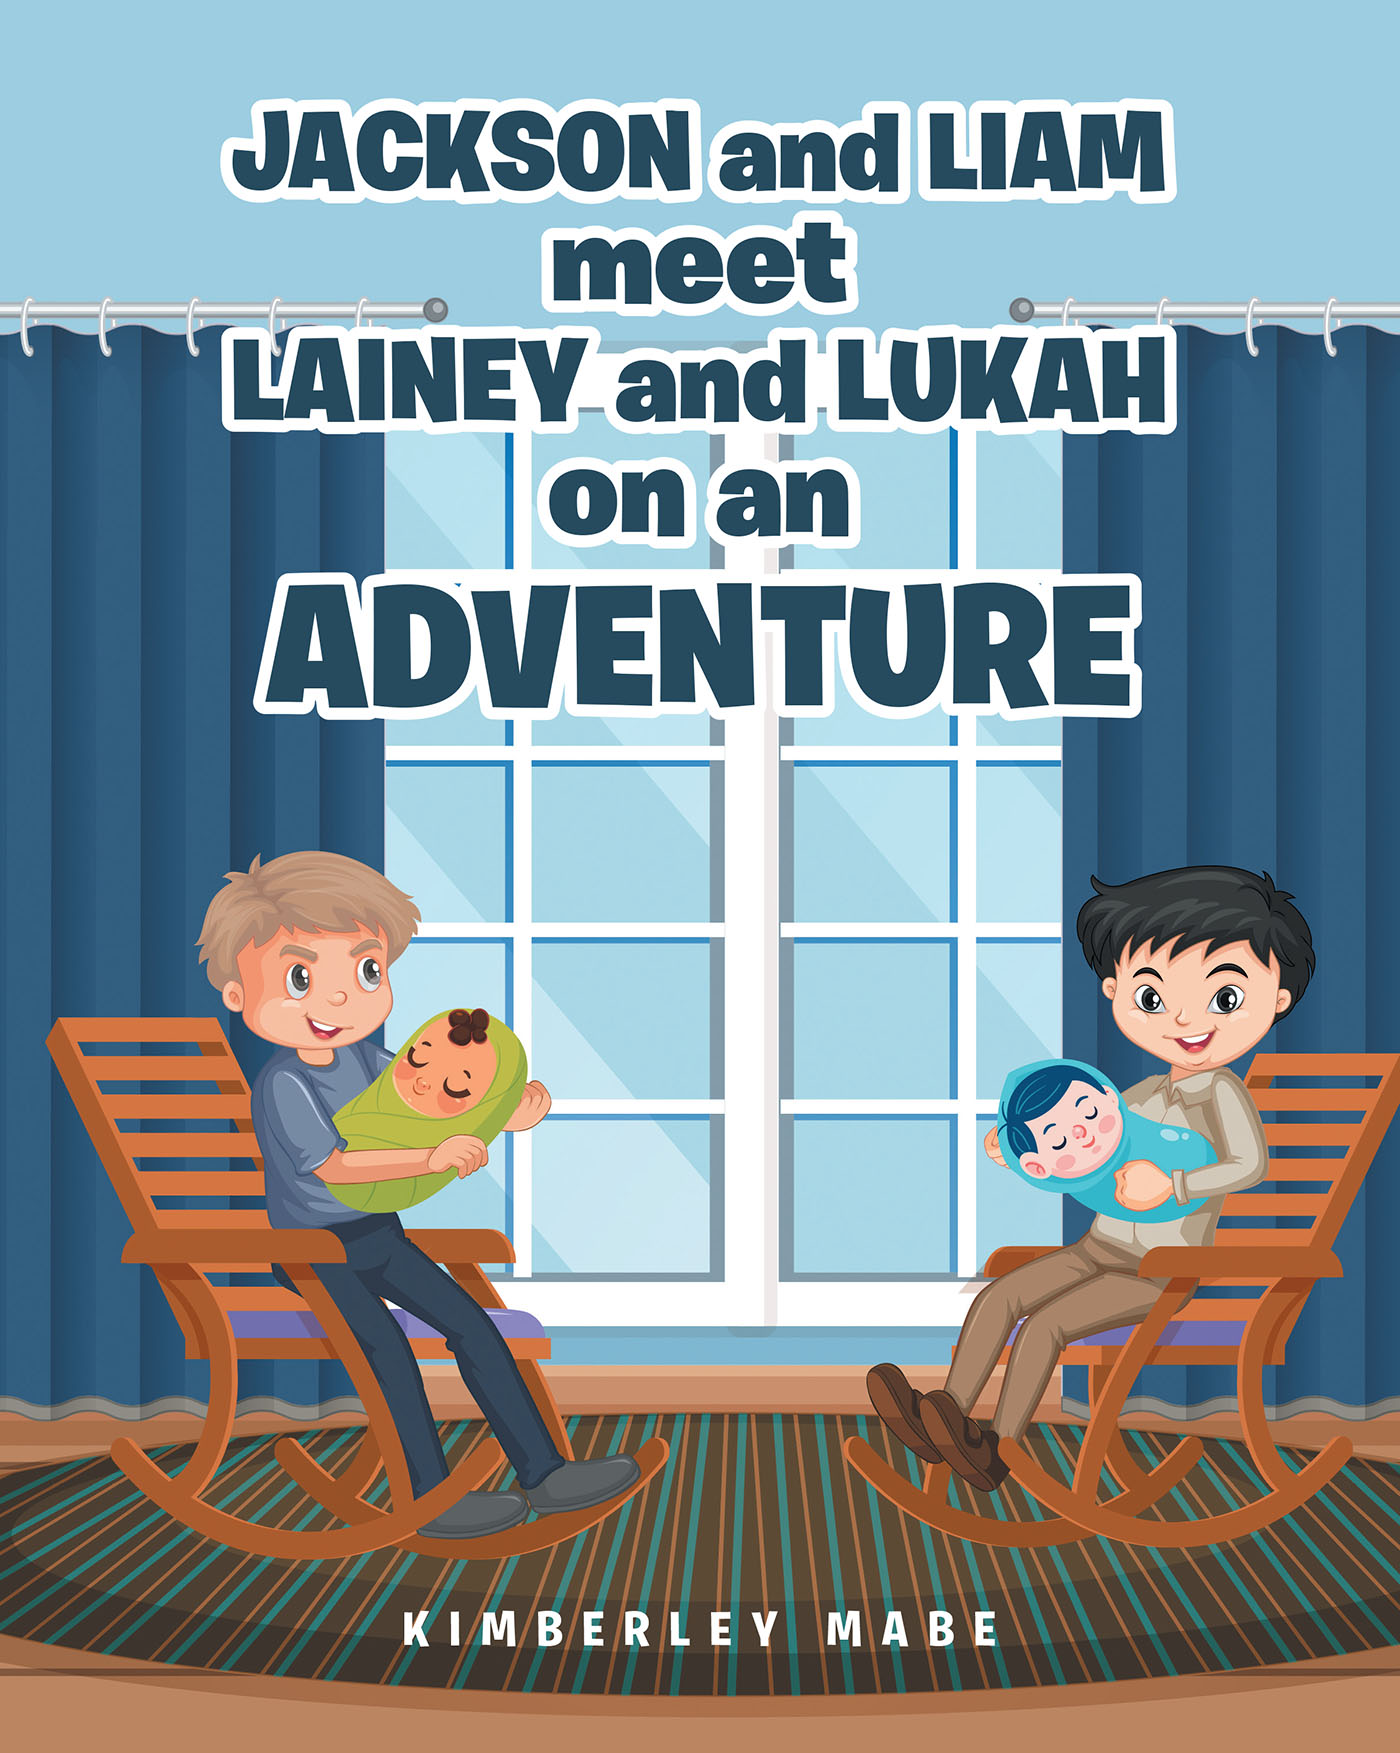 Kimberley Mabe’s Newly Released “Jackson and Liam meet Lainey and Lukah on an Adventure” is a Celebration of the Blessing That All Babies Represent